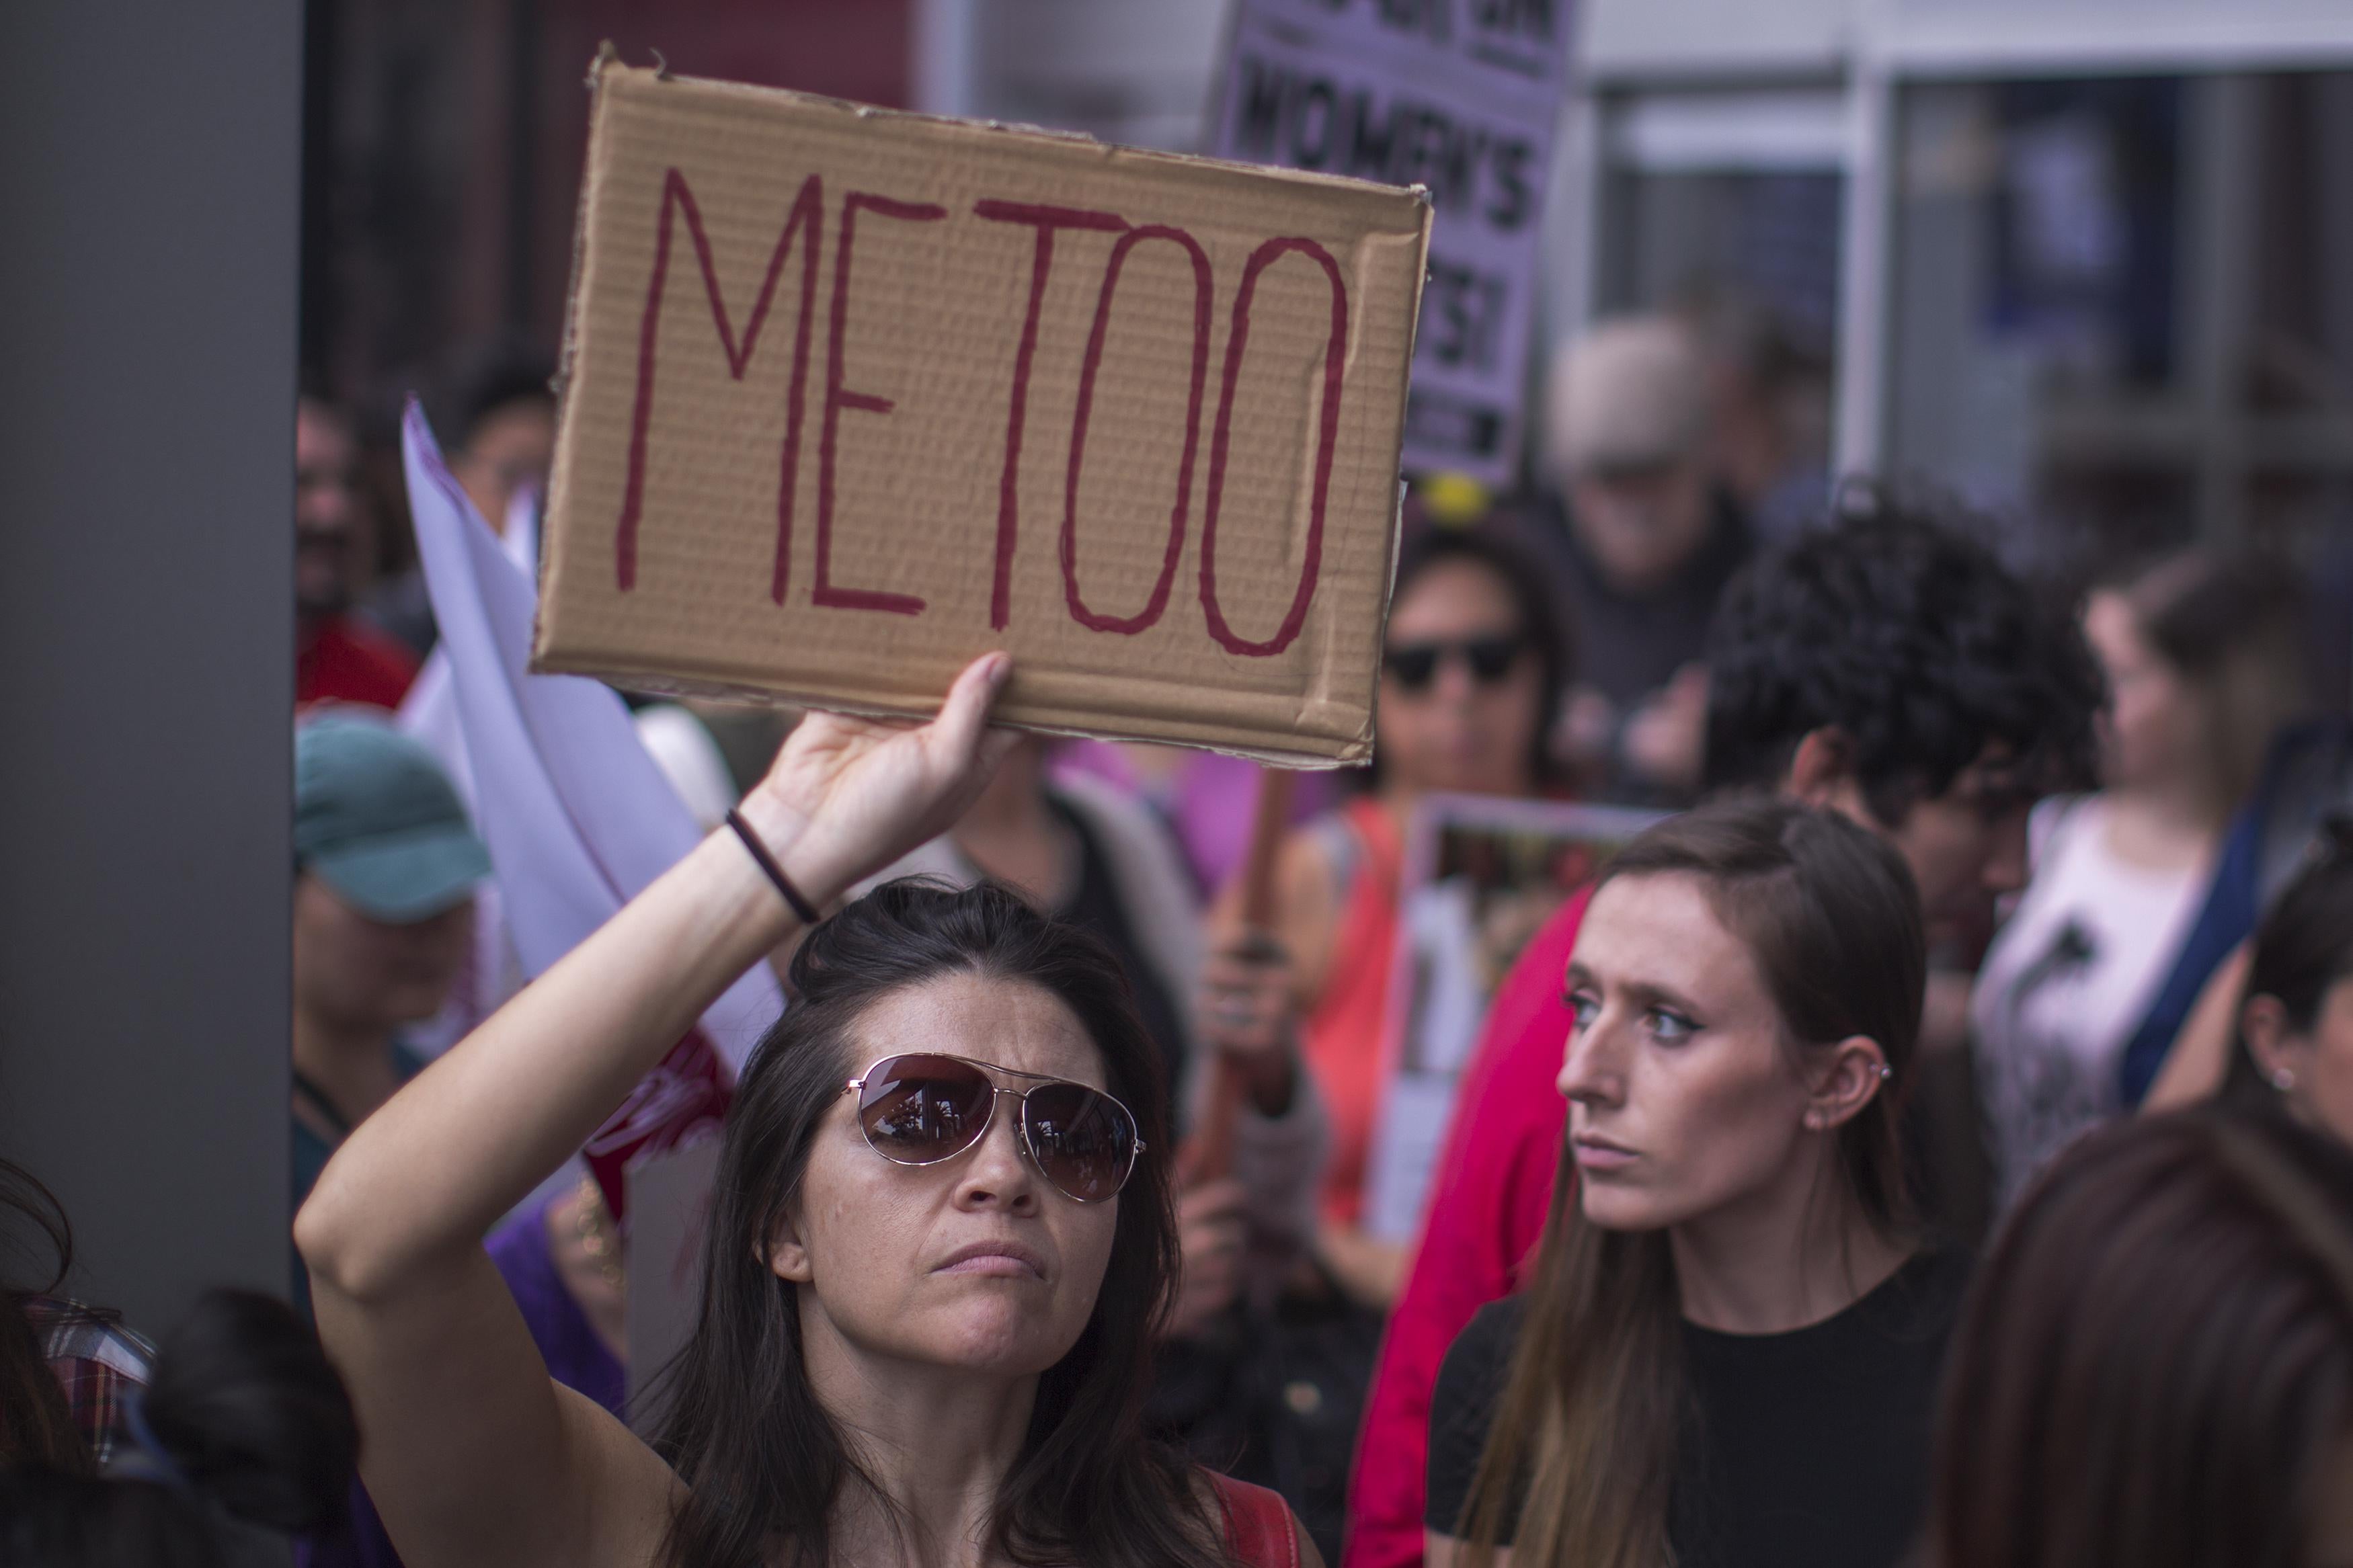 A woman holds up a cardboard sign that says "METOO."